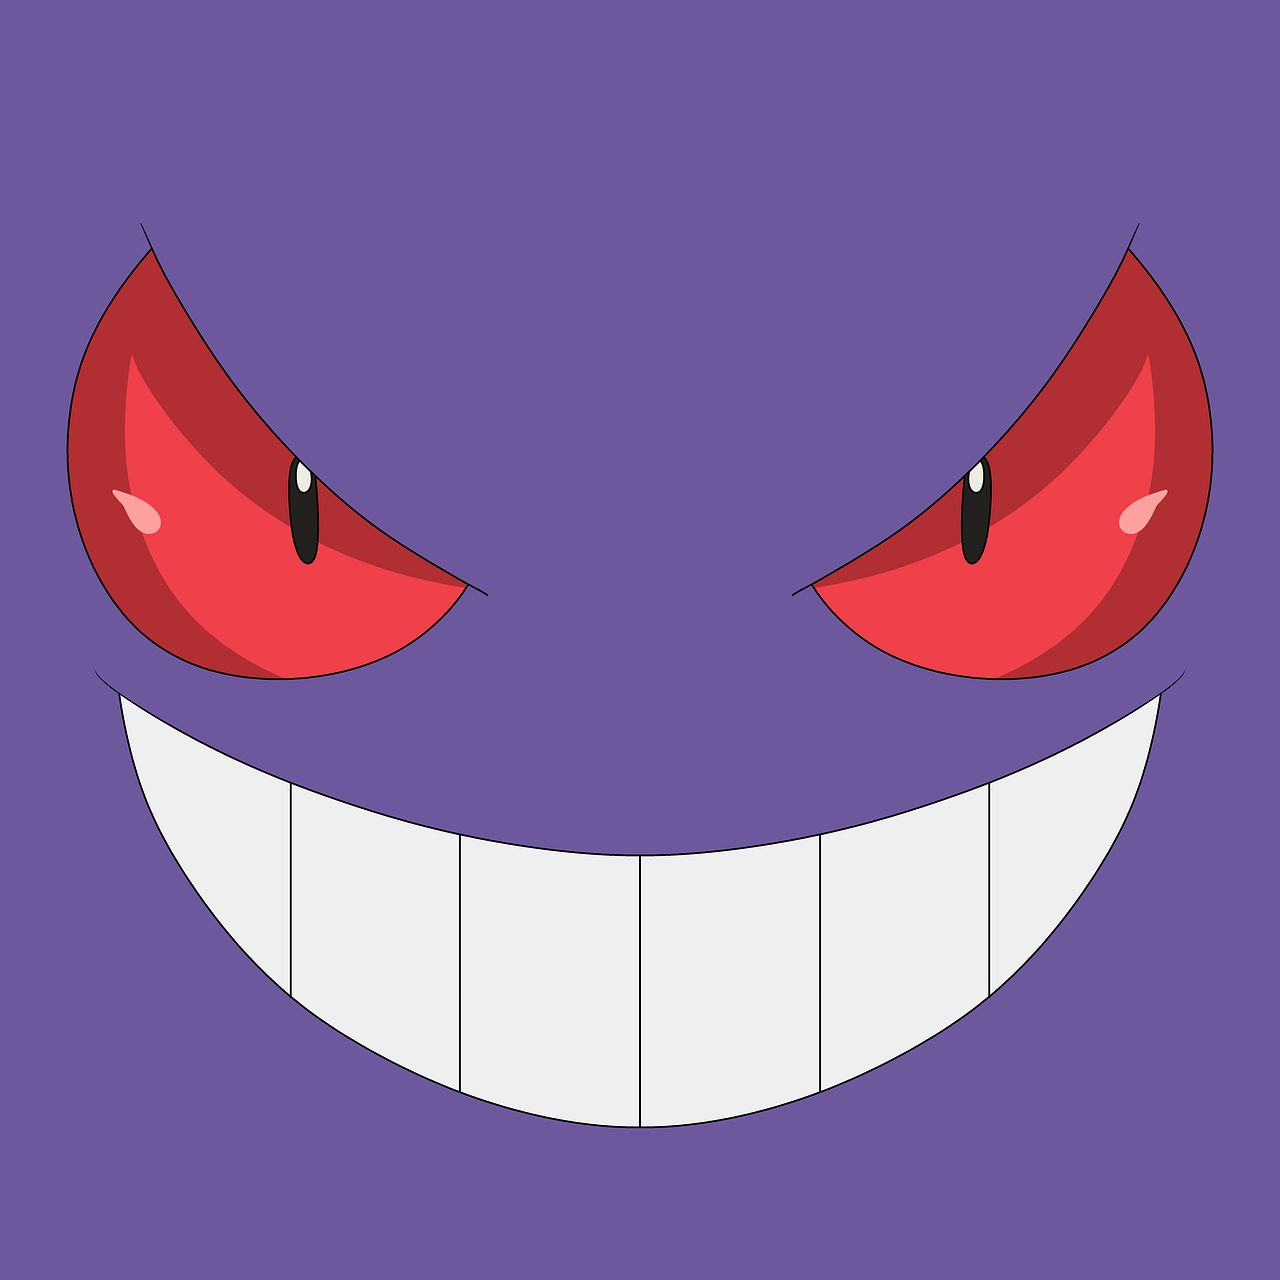 a close up of an evil face on a purple background, vector art, style of pokemon, red eyed, wide smile, pokemon anime style